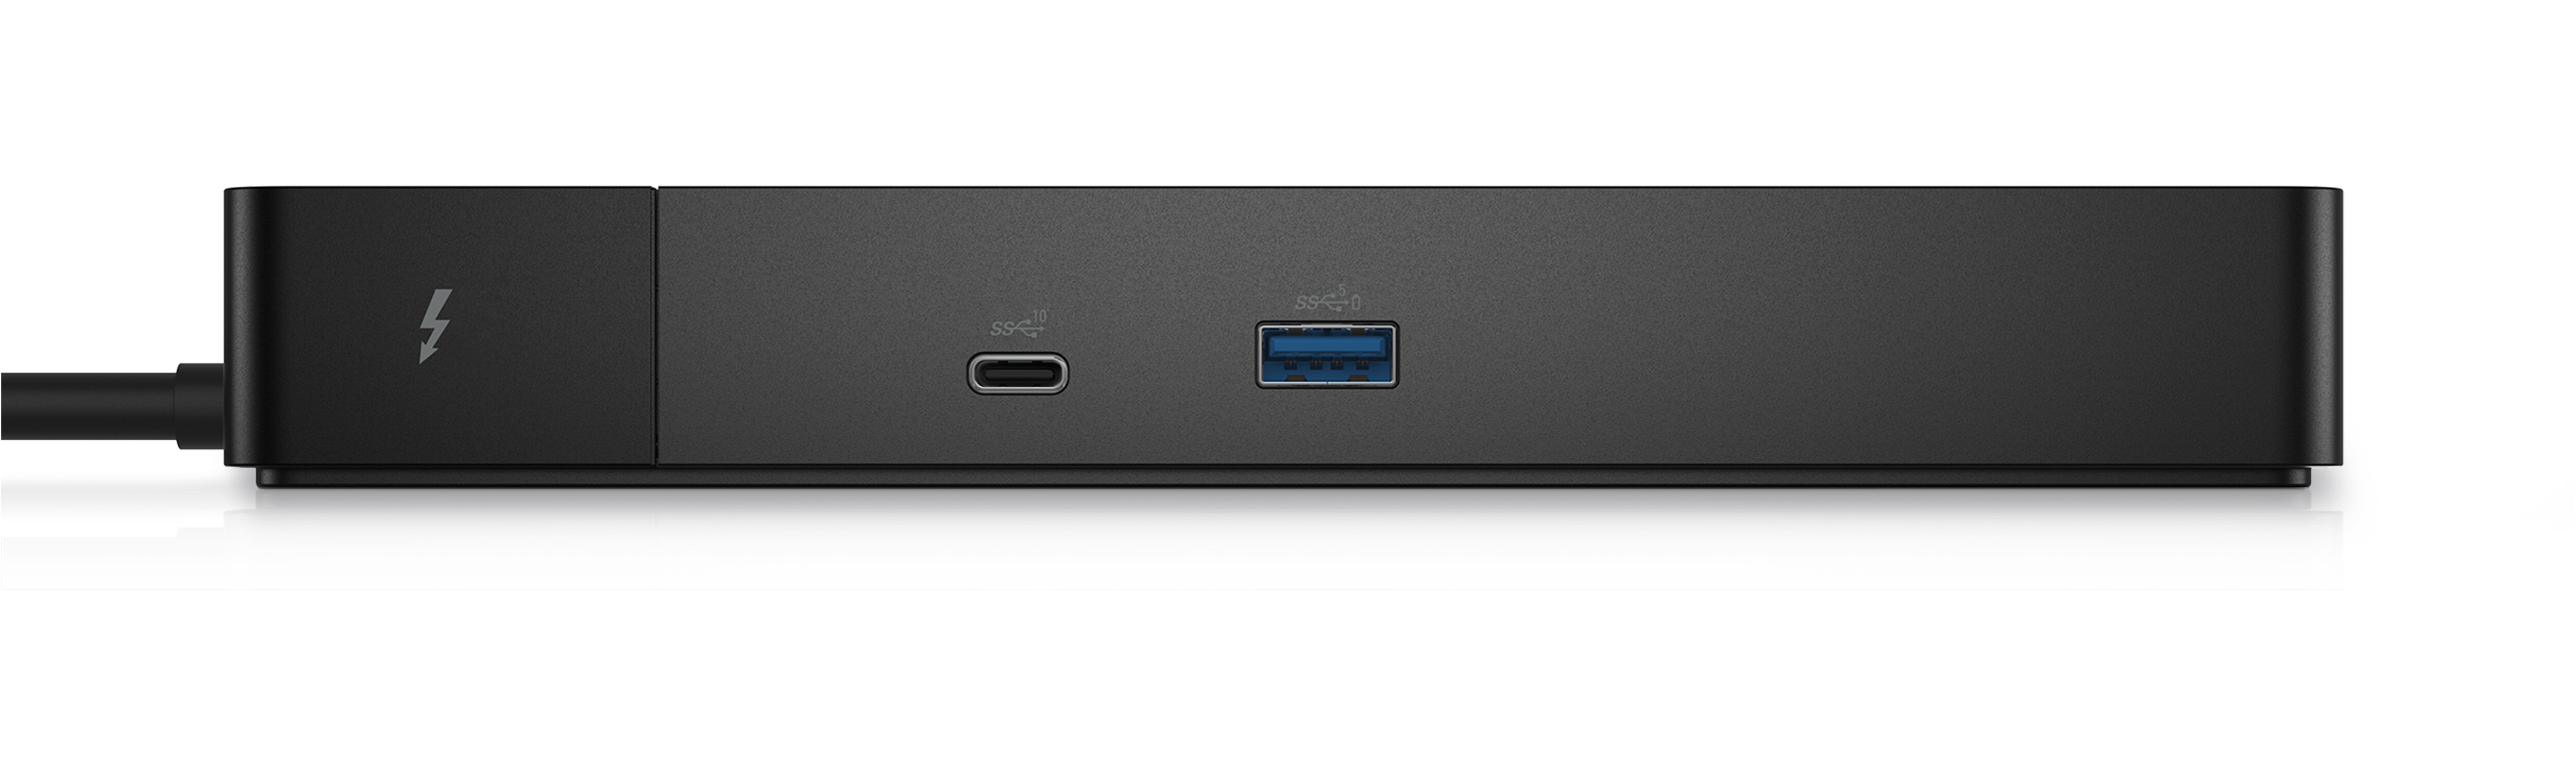 Station d'accueil Dell Thunderbolt™ Dock – (WD22TB4) : stations d